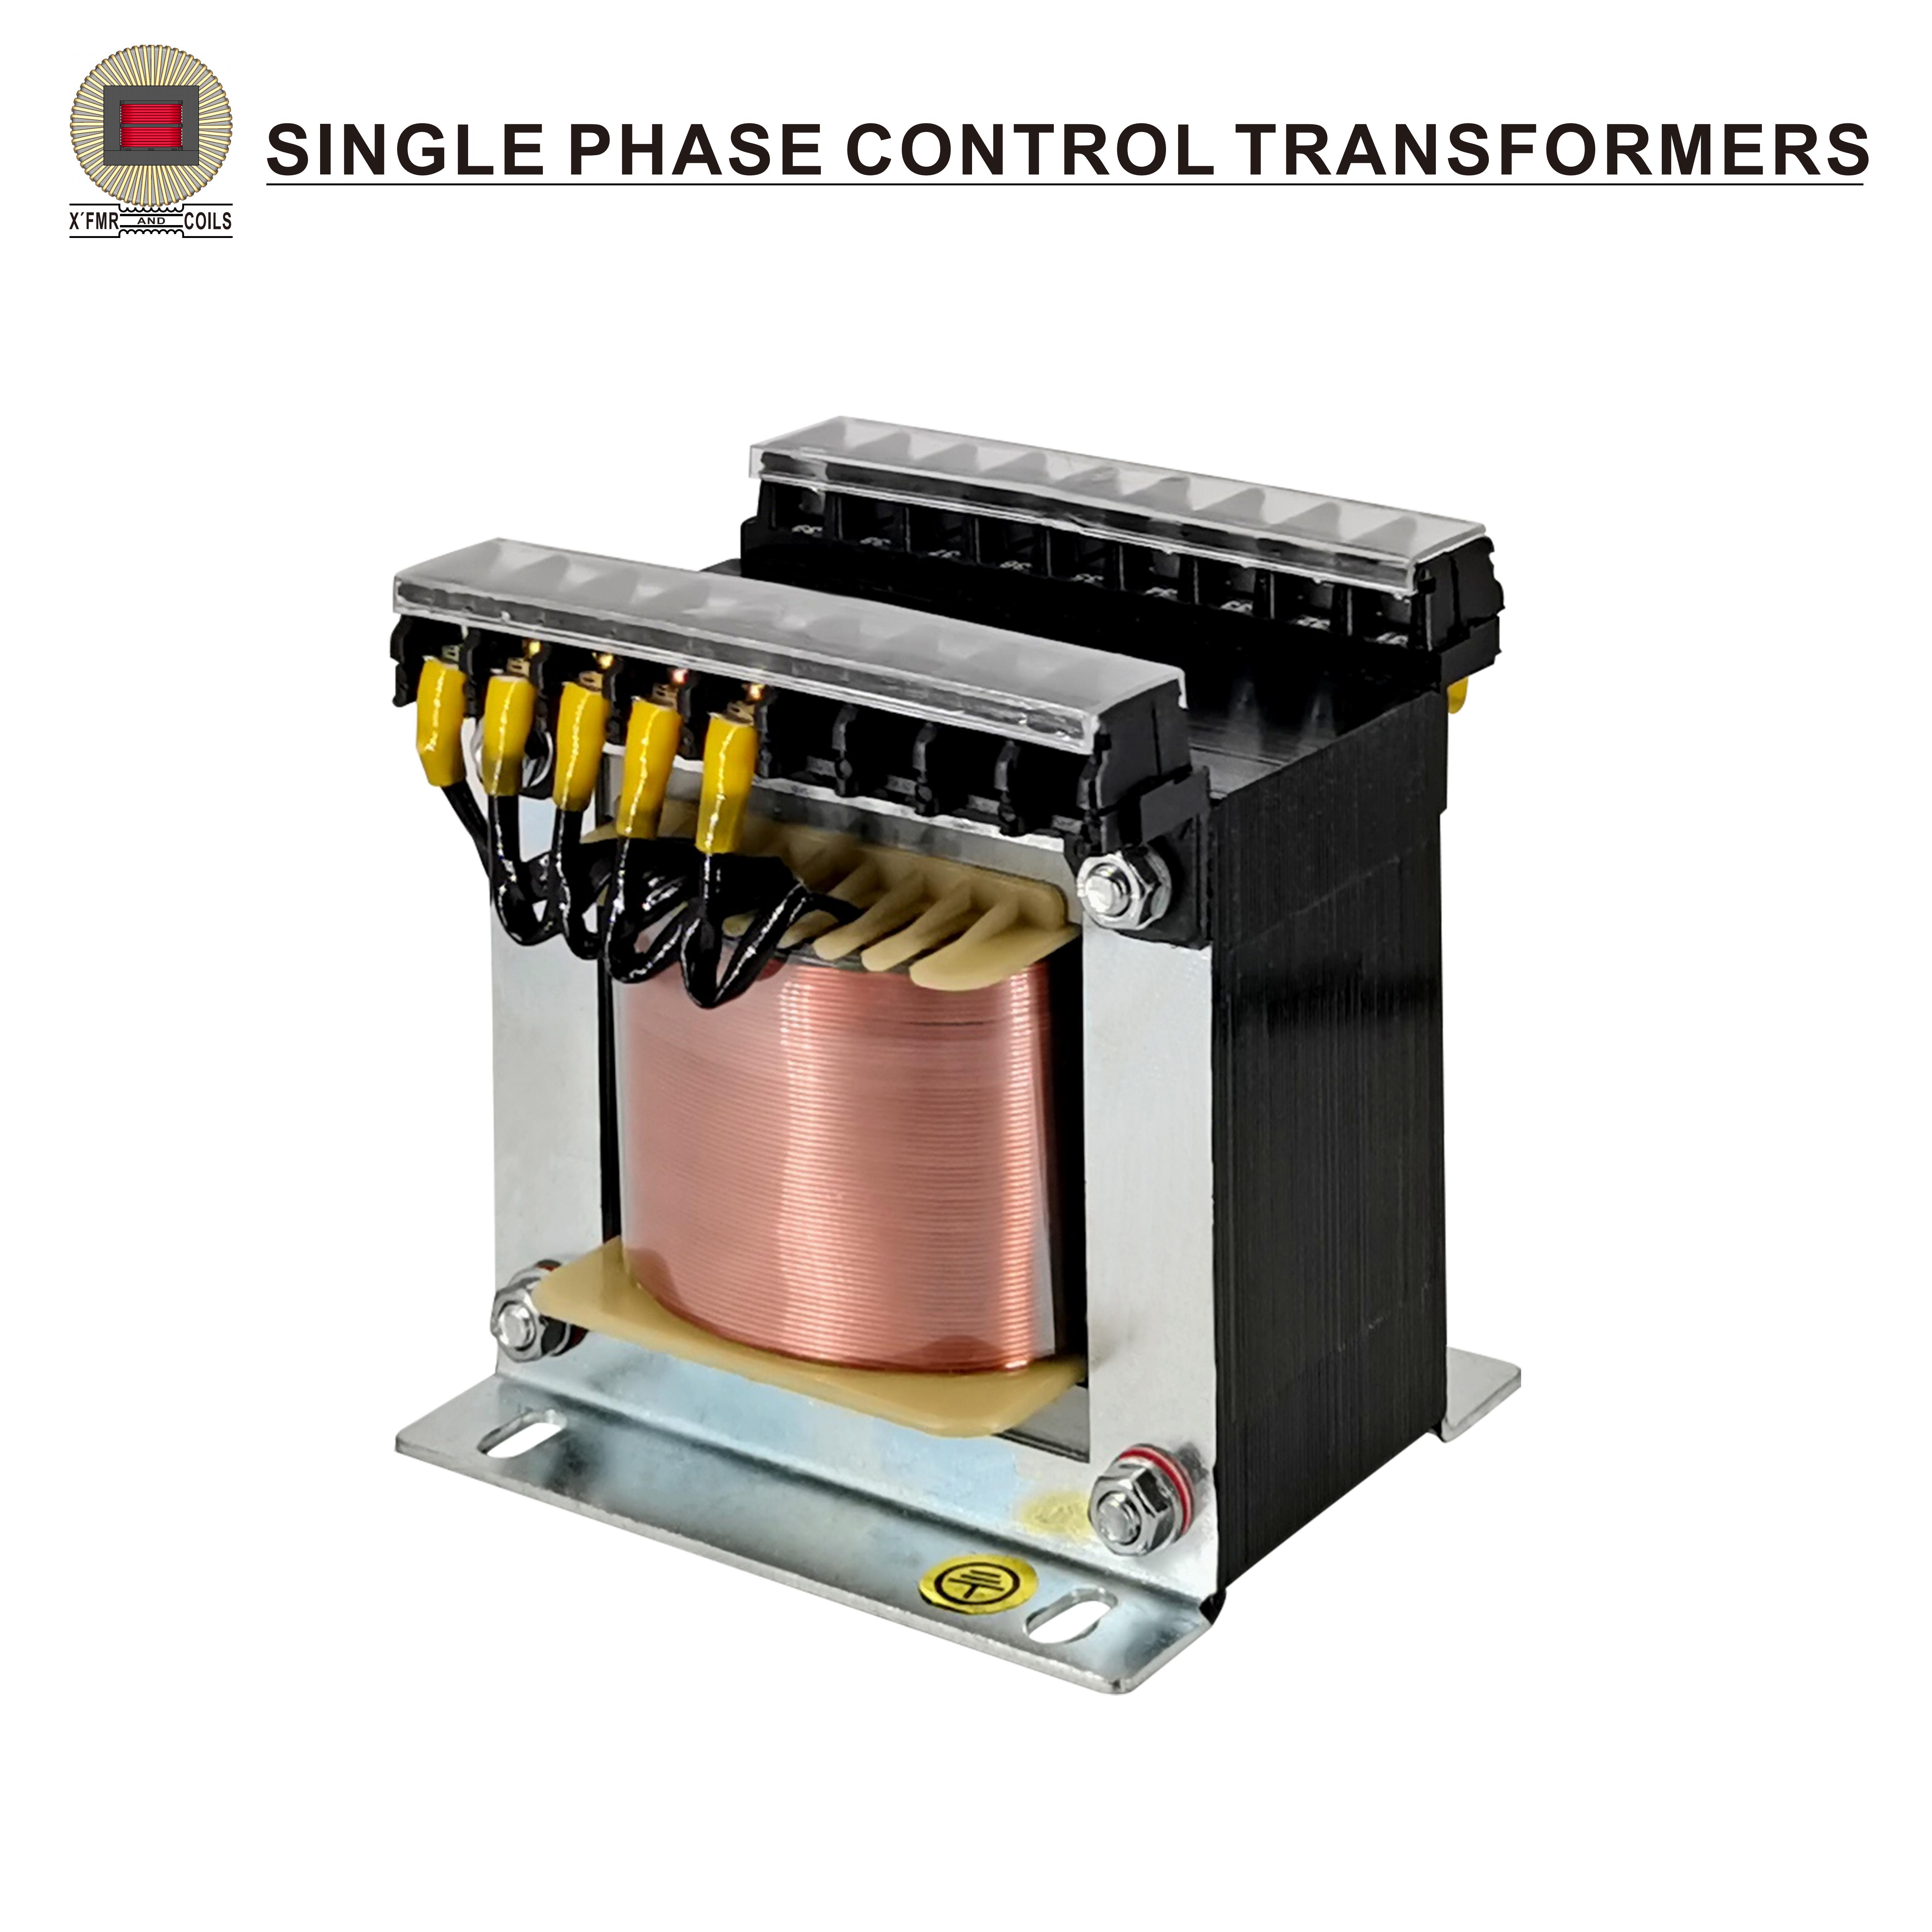 Single Phase Control Transformers SPCT-01 Series